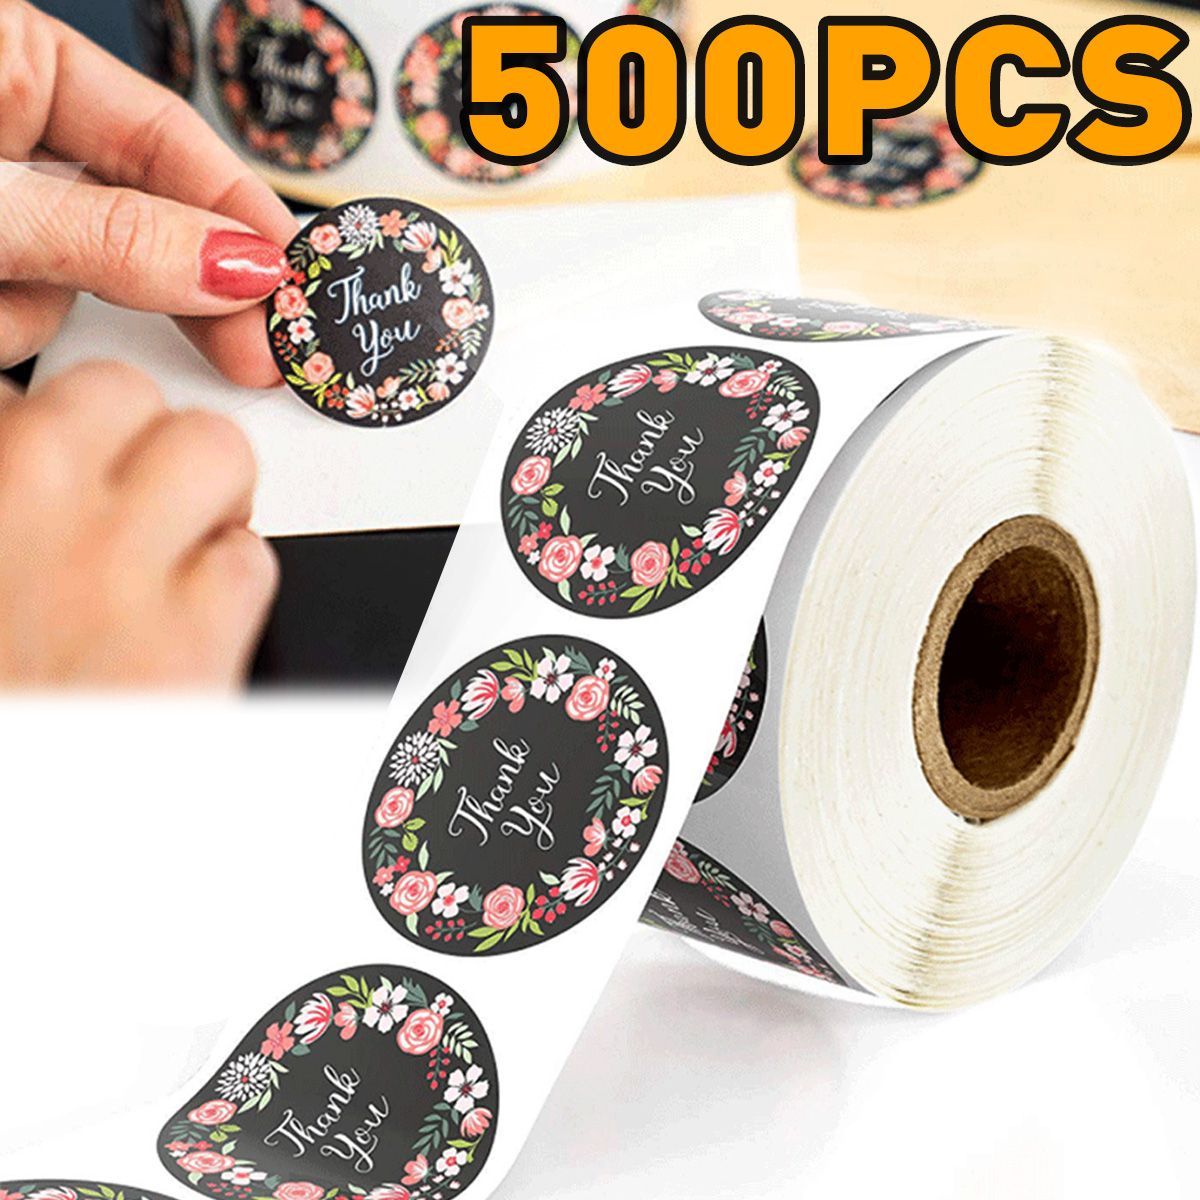 500PcsSet-Round-Thank-You-Stickers-Paper-Envelope-Packaging-Gift-Label-Roll-Tape-1617838